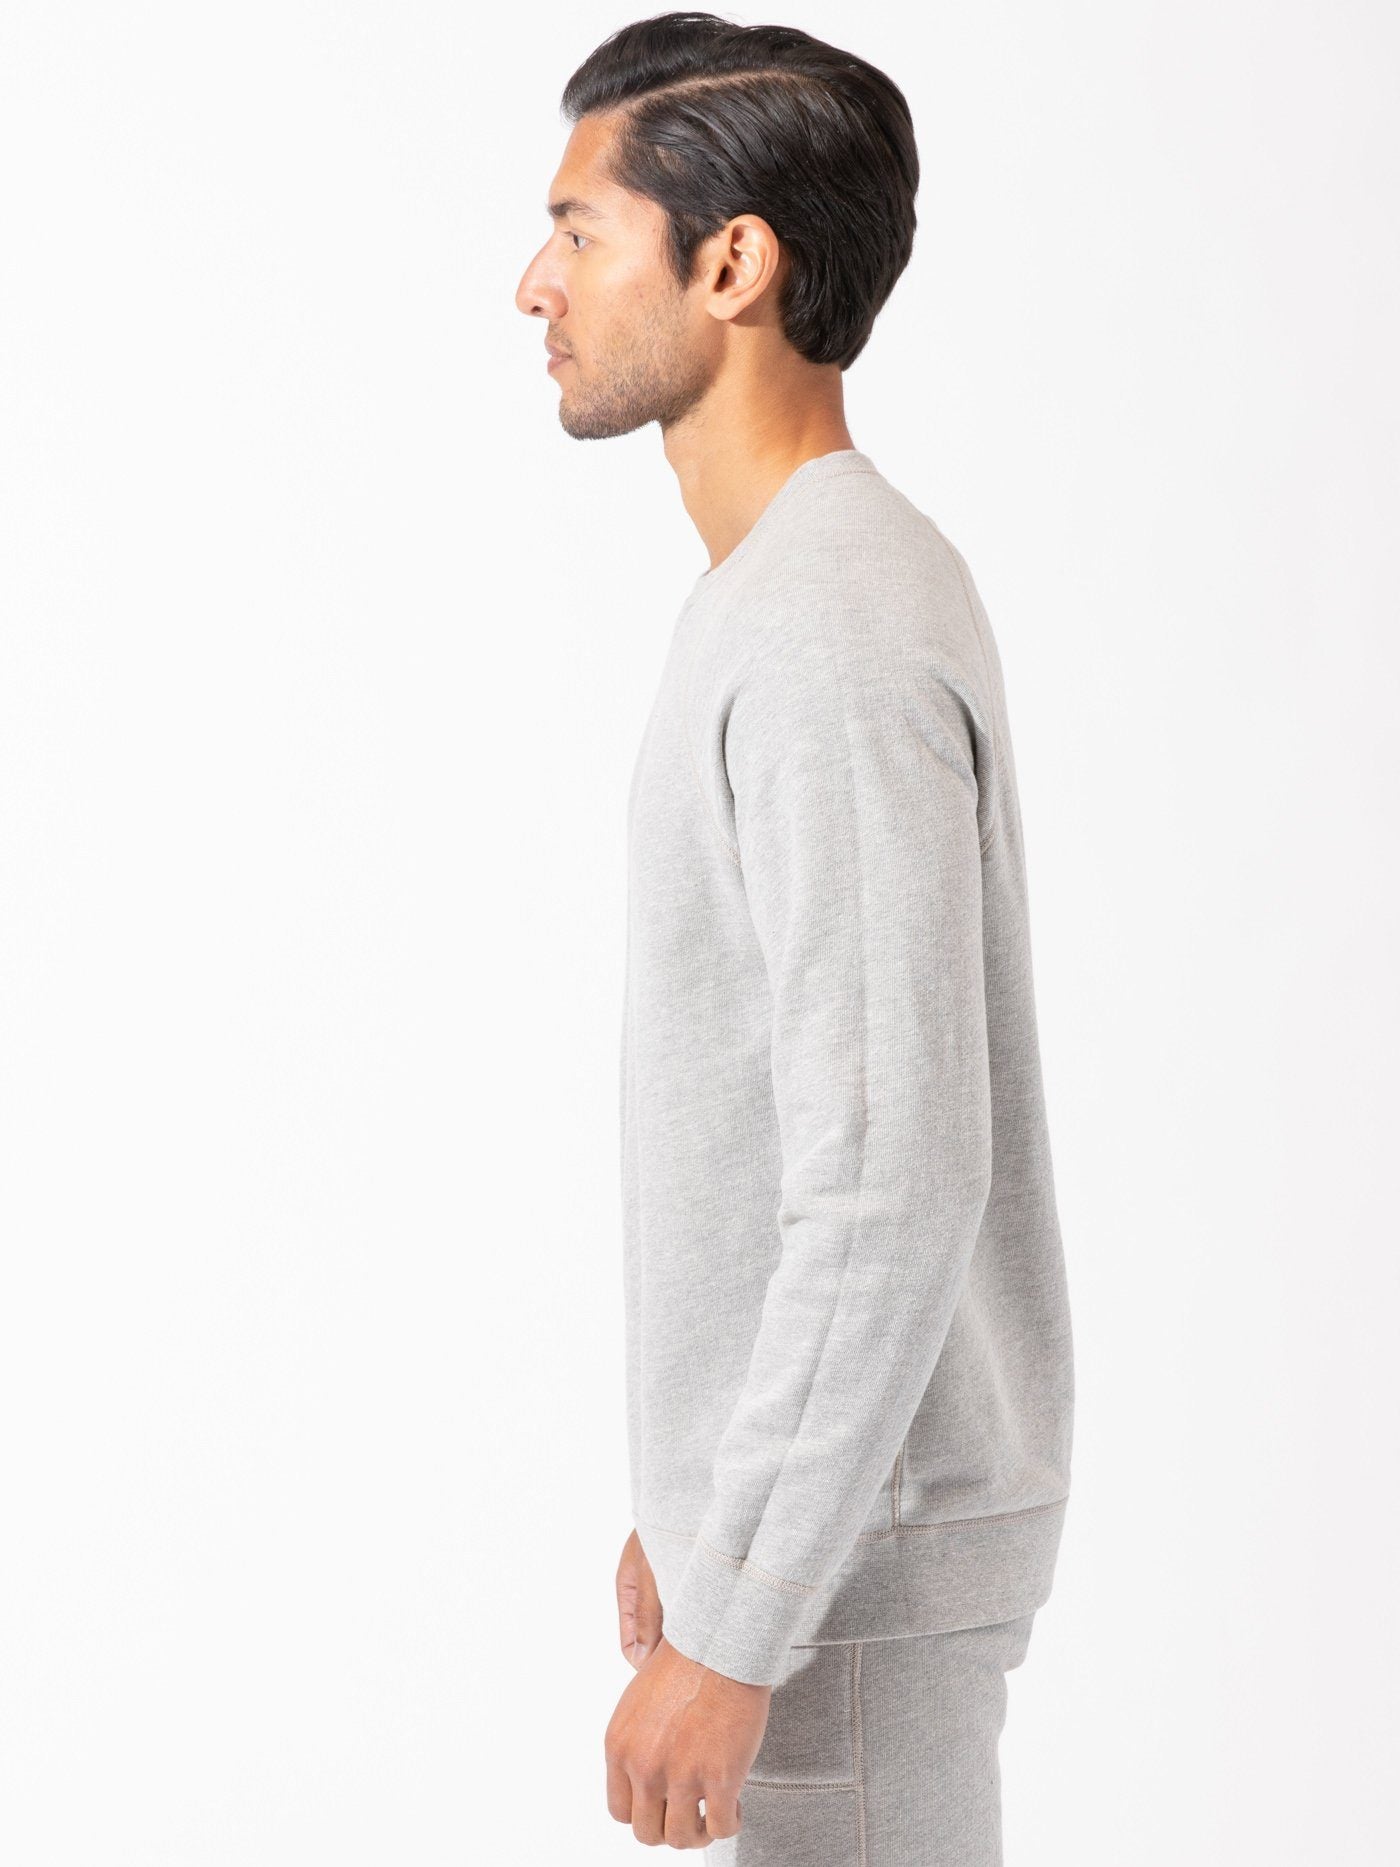 Taddeo Reversible Pullover Mens Tops Threads 4 Thought 